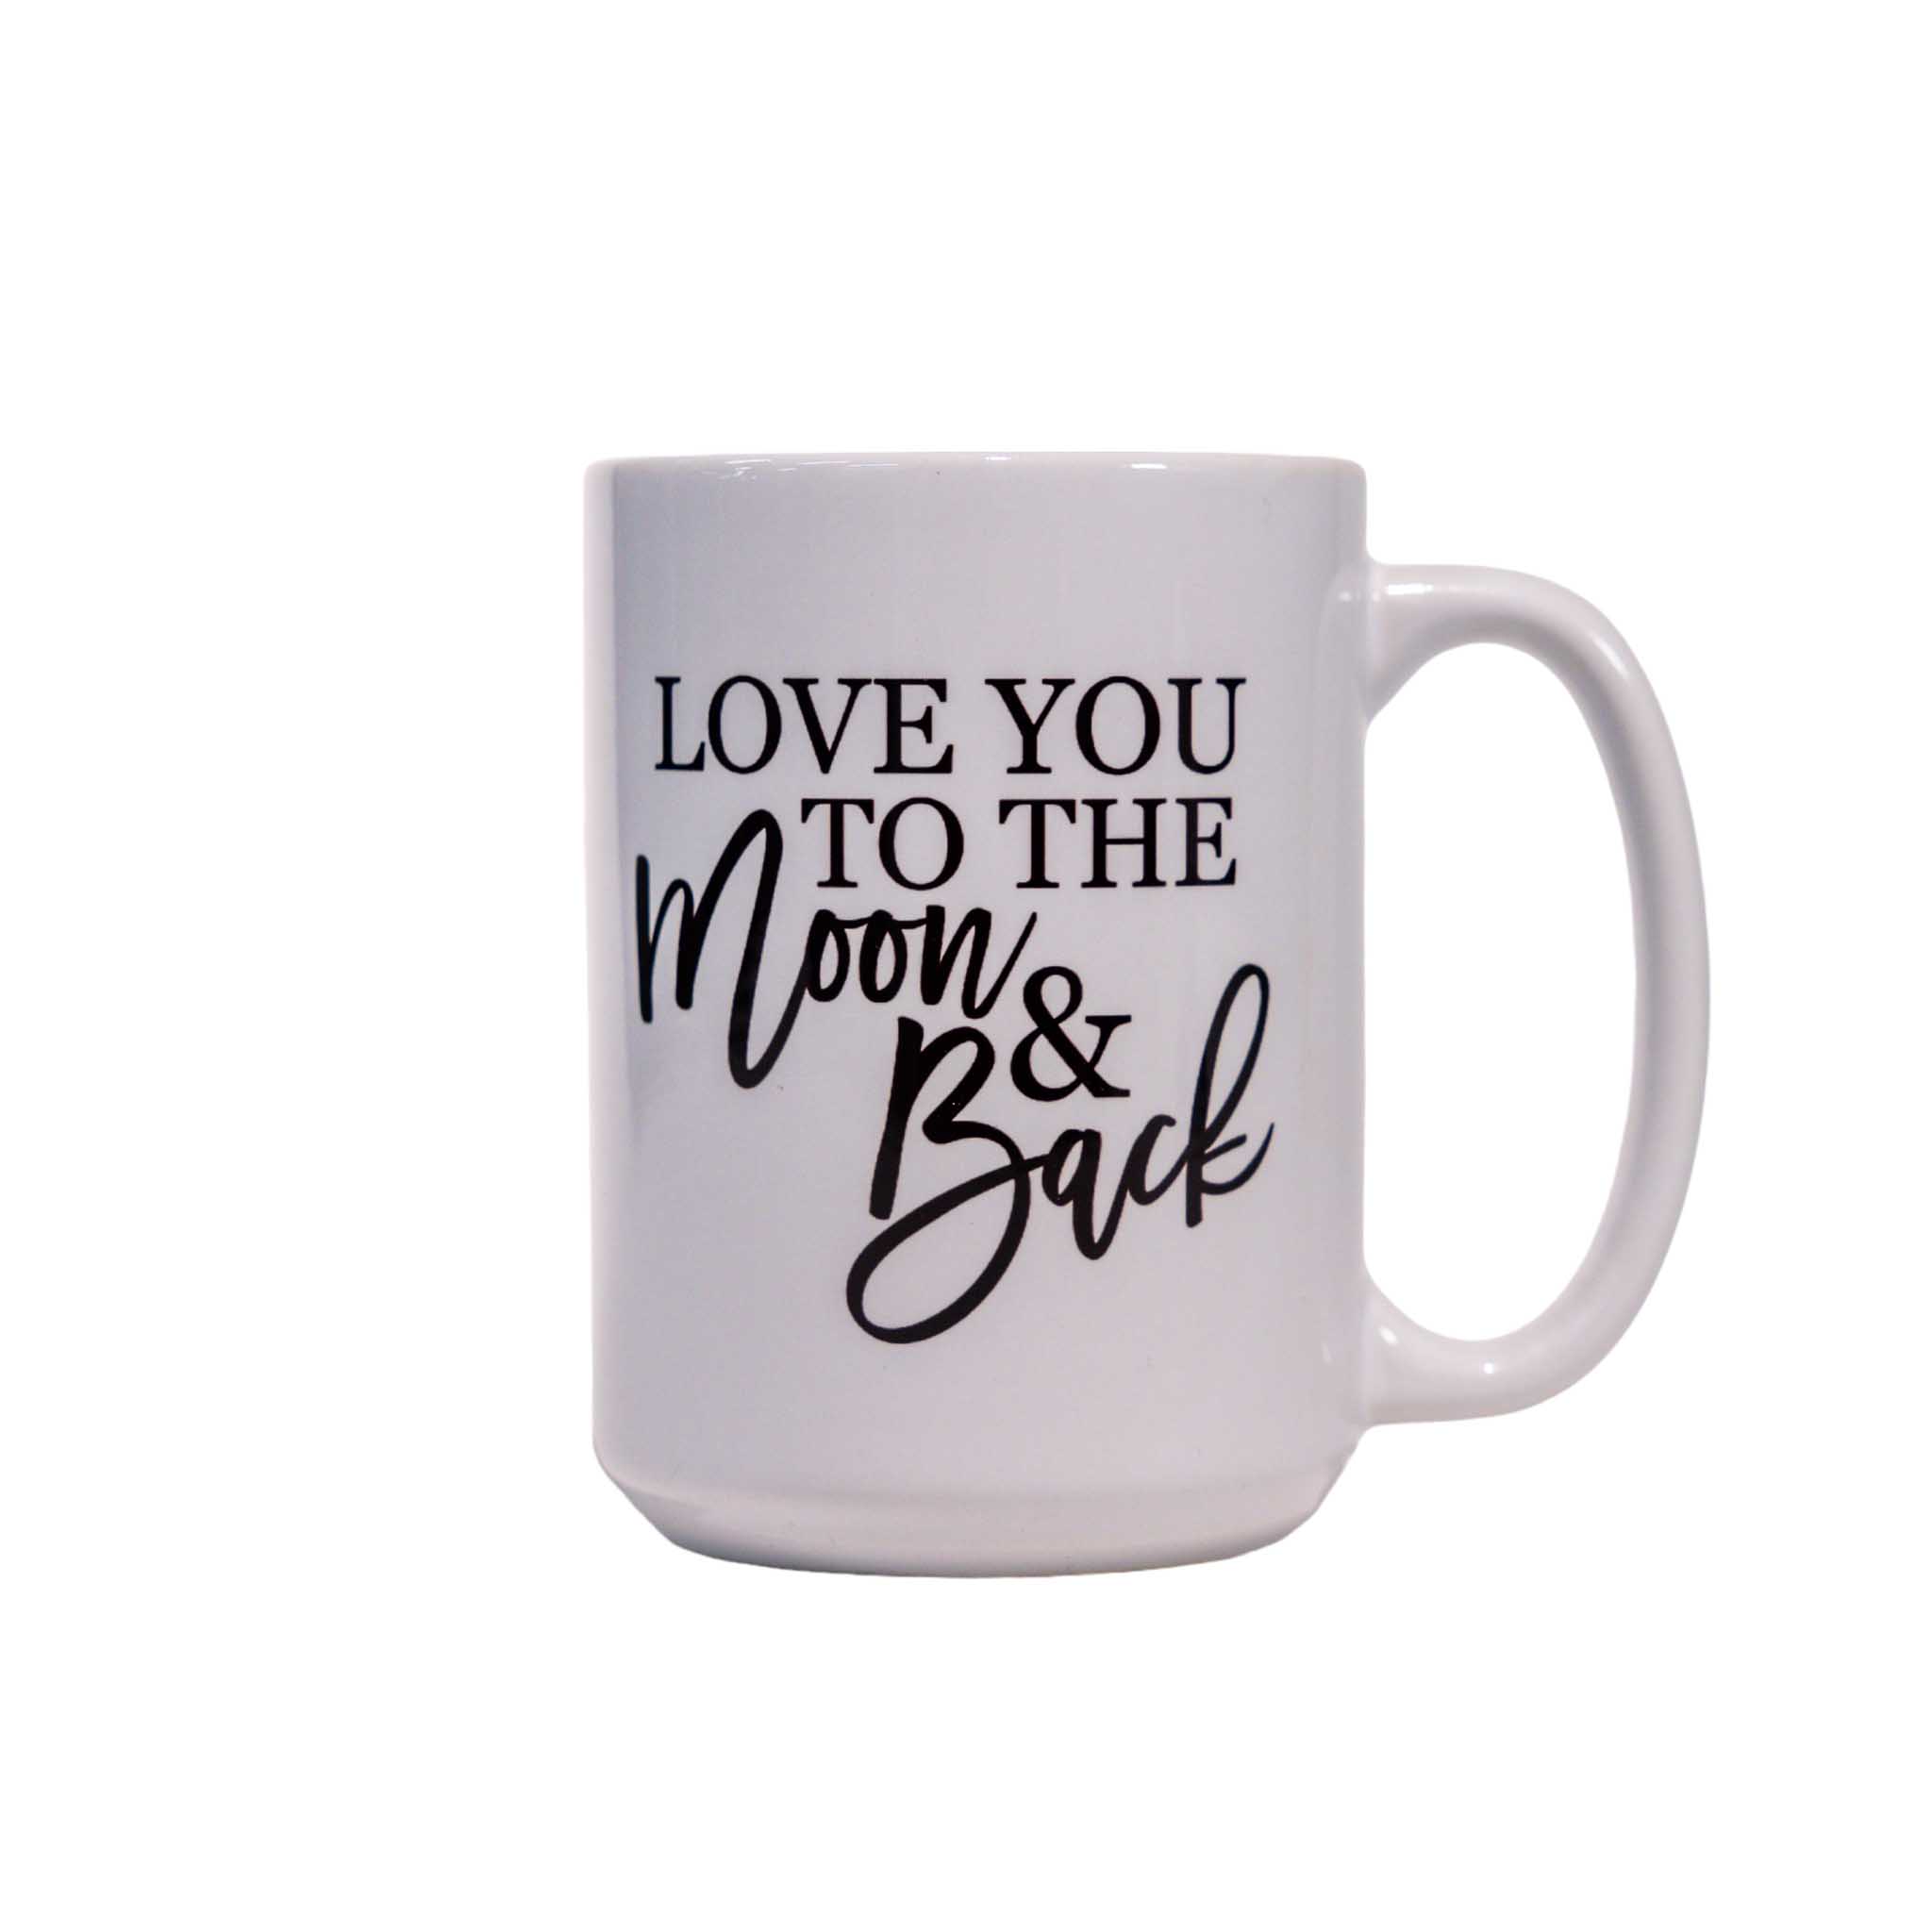 Large Mug - Love you to the moon and back